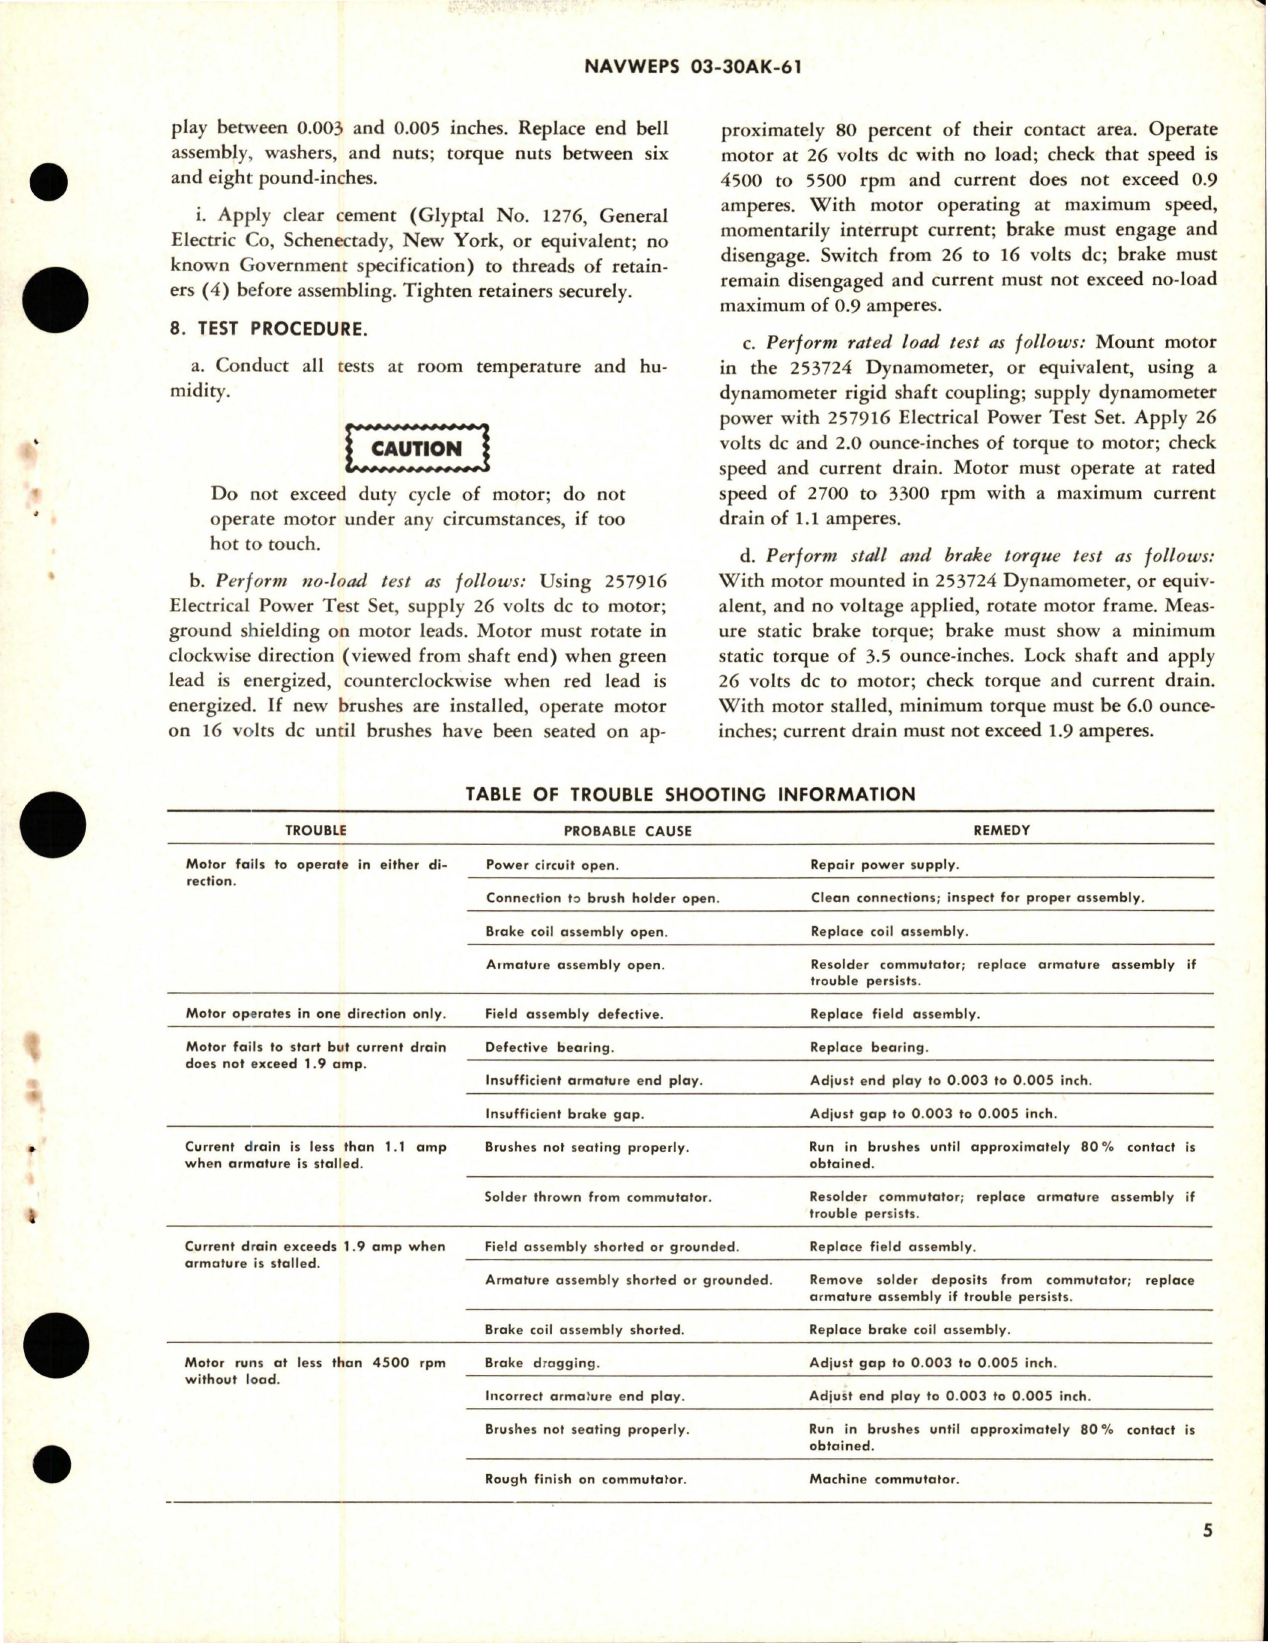 Sample page 5 from AirCorps Library document: Overhaul Instructions with Parts Breakdown for Direct-Current Motor - Part 32747-1 